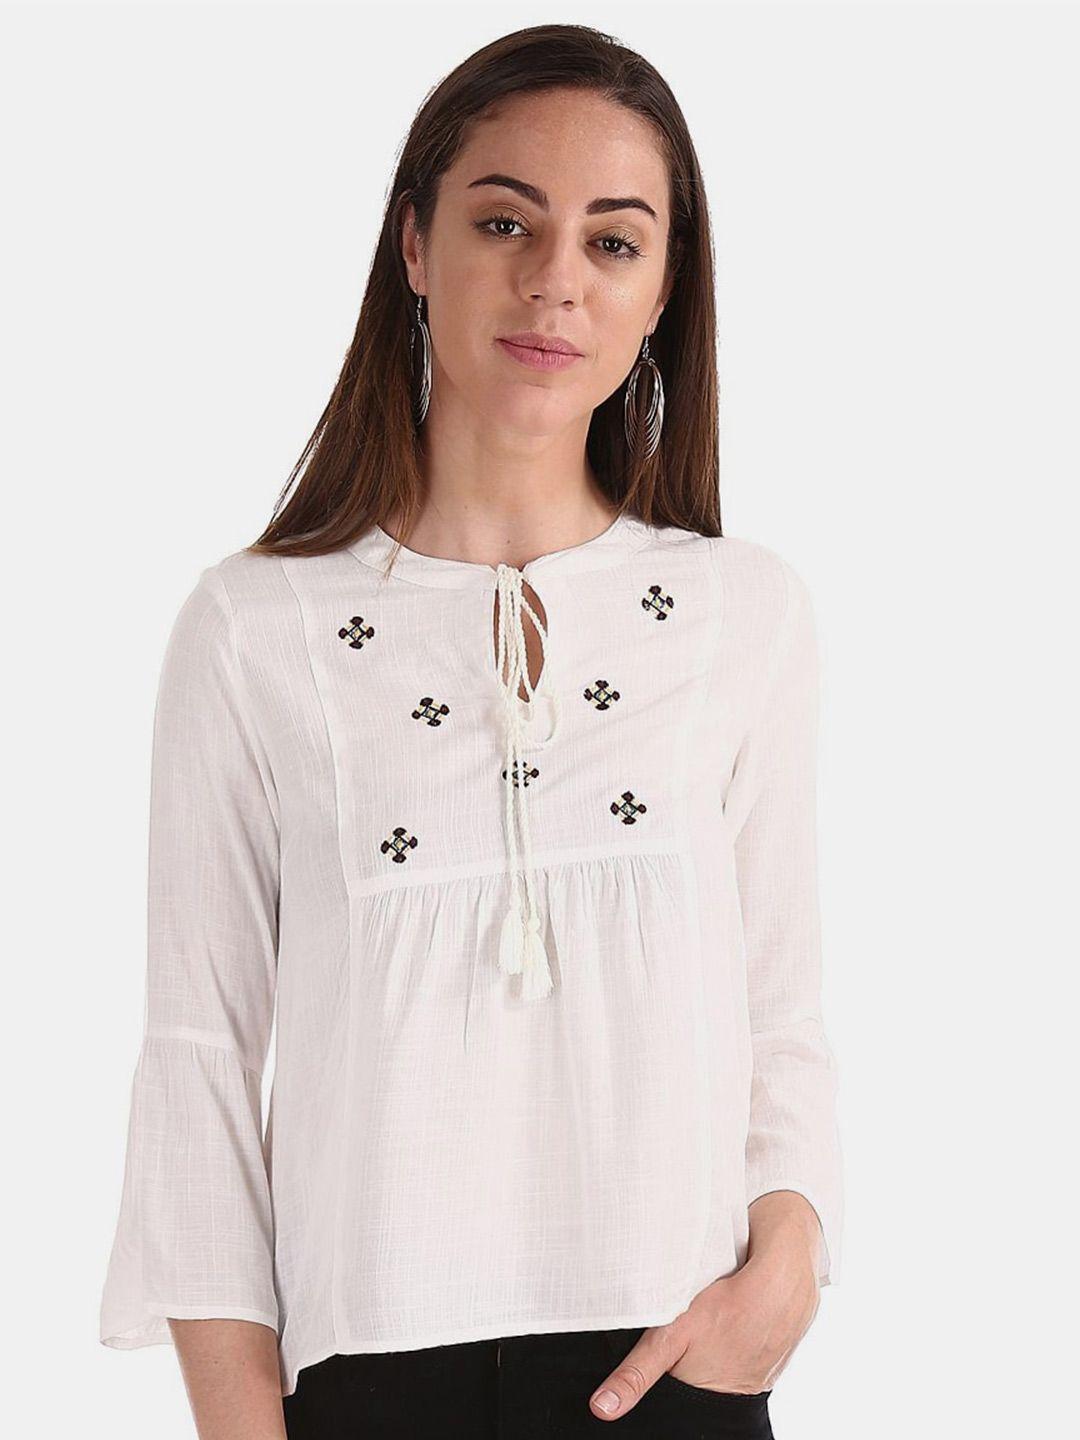 v-mart tie-up neck embroidered cotton top